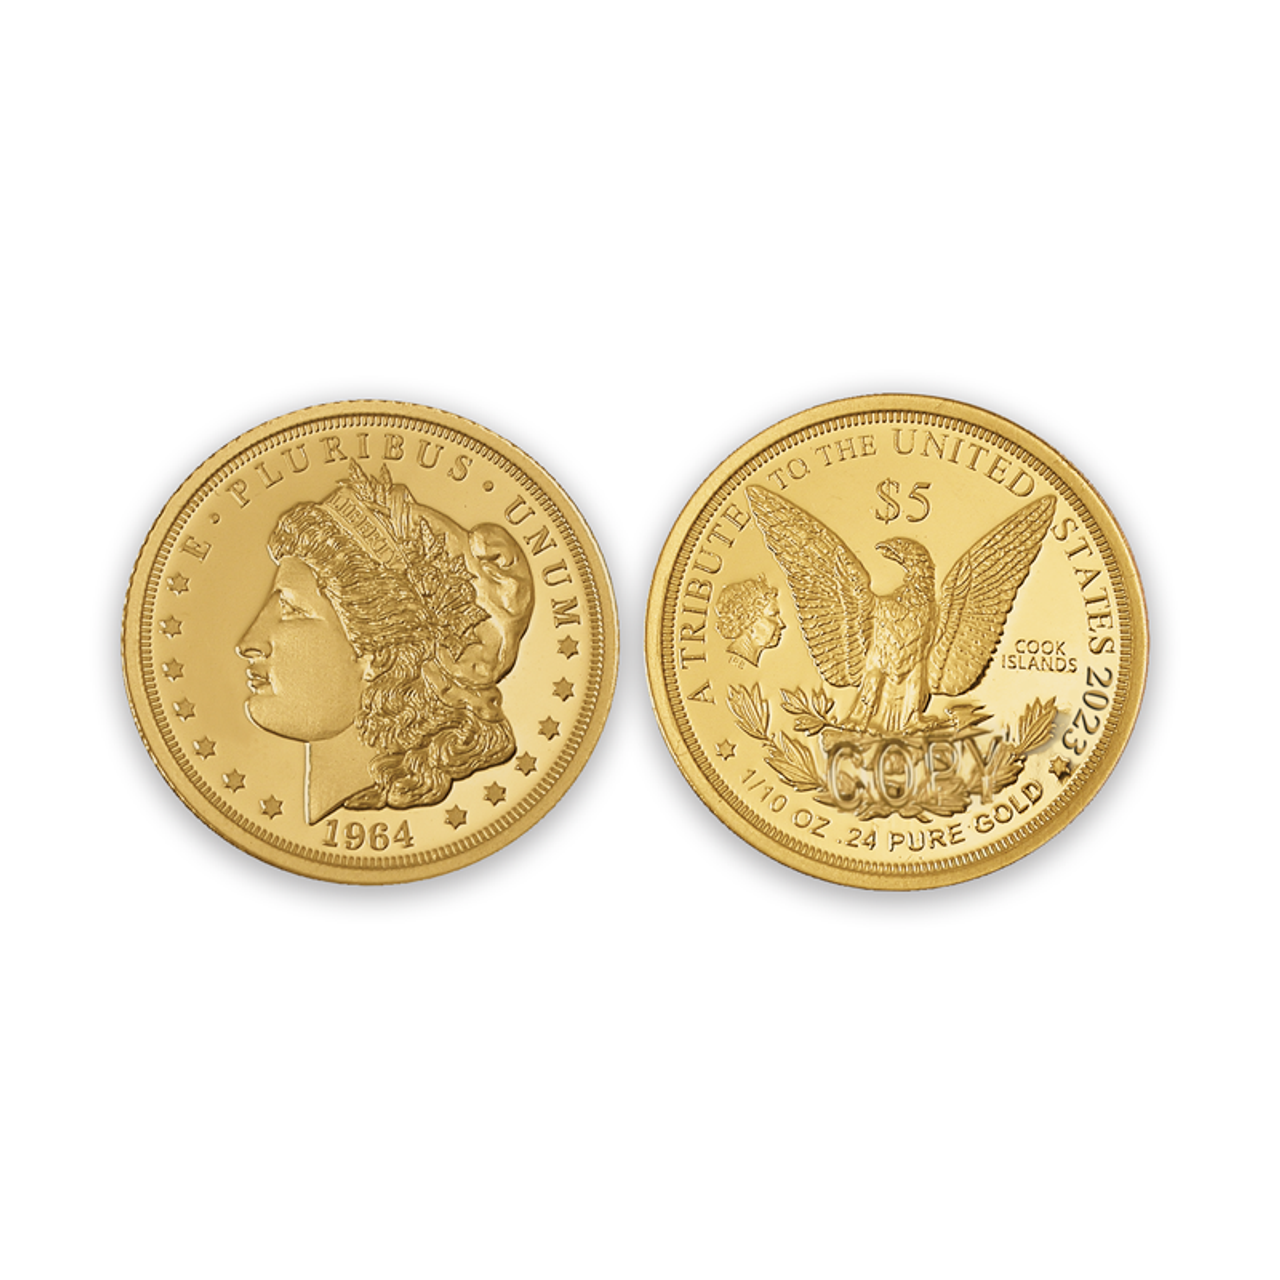 2022 .24 Pure Gold Morgan $5 Coin - National Collector's Mint